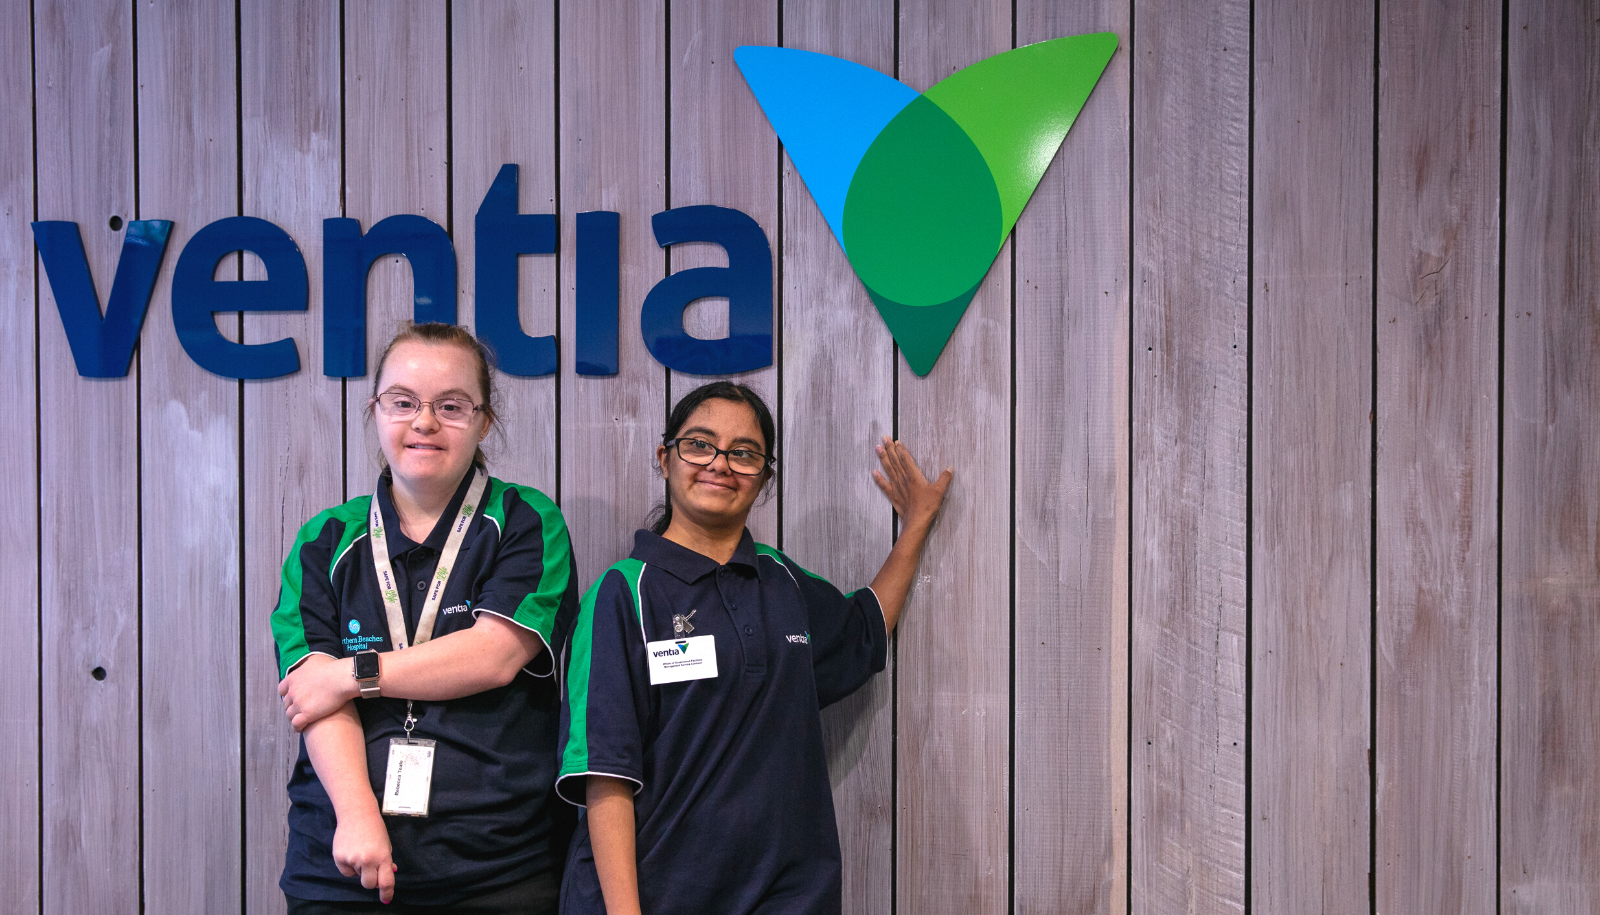 Two staff members at Ventia’s office standing in front of the company’s logo signage